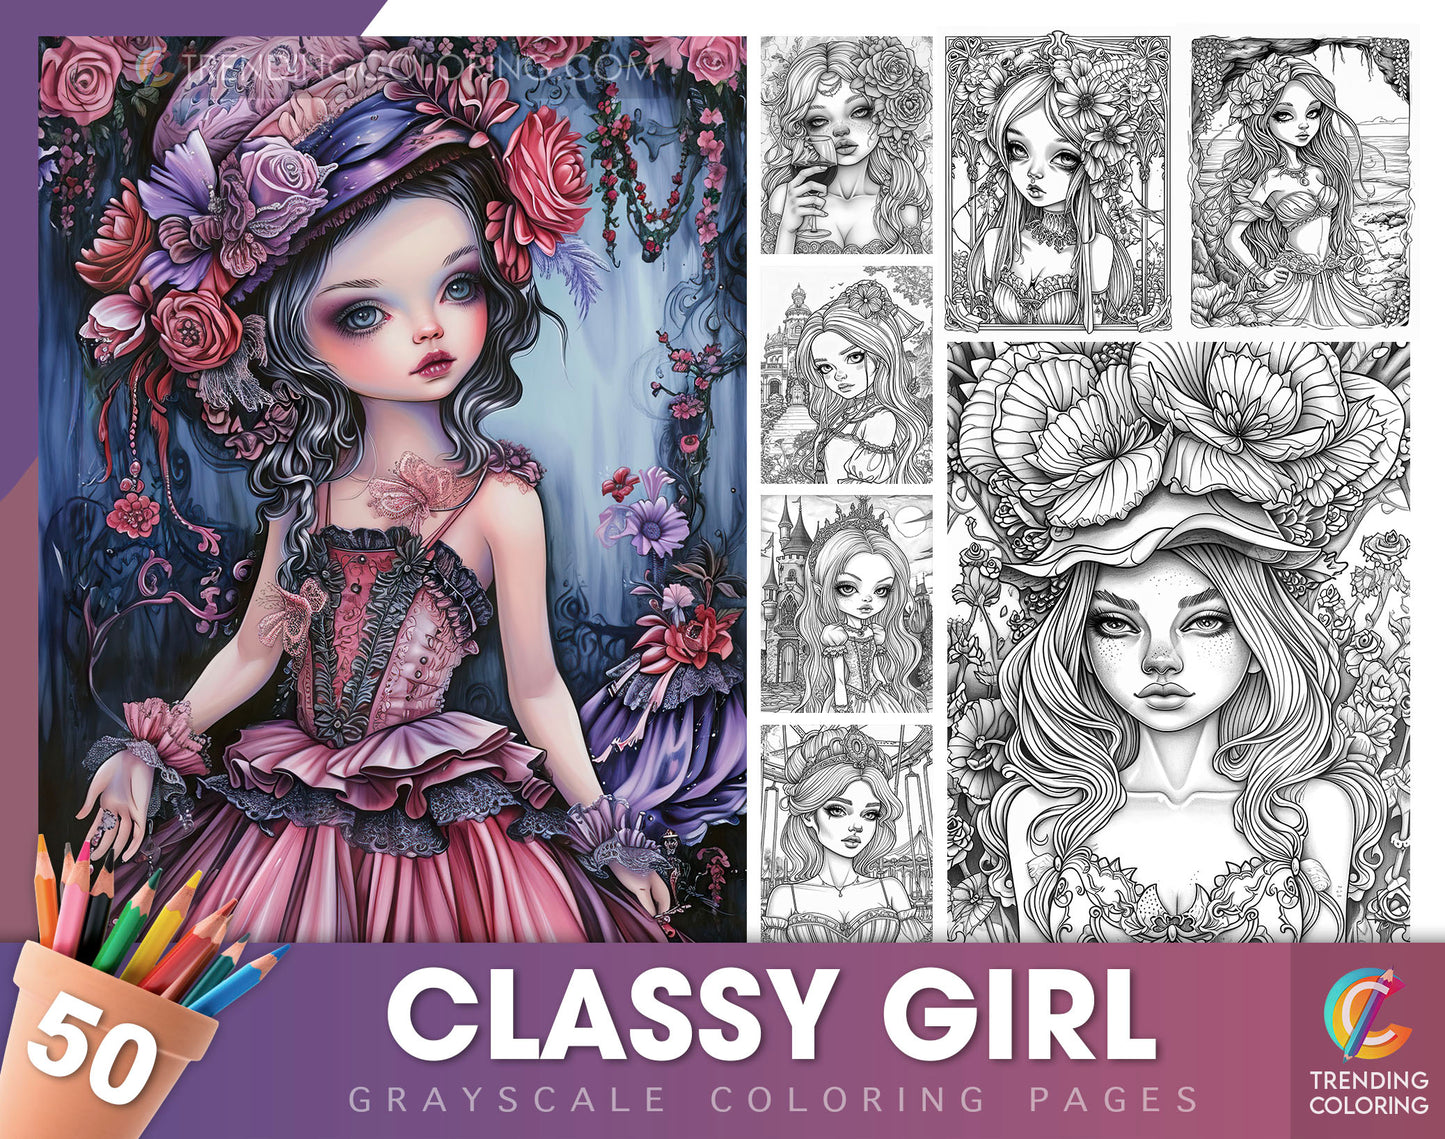 50 Classy Girl Grayscale Coloring Pages - Instant Download - Printable Dark/Light